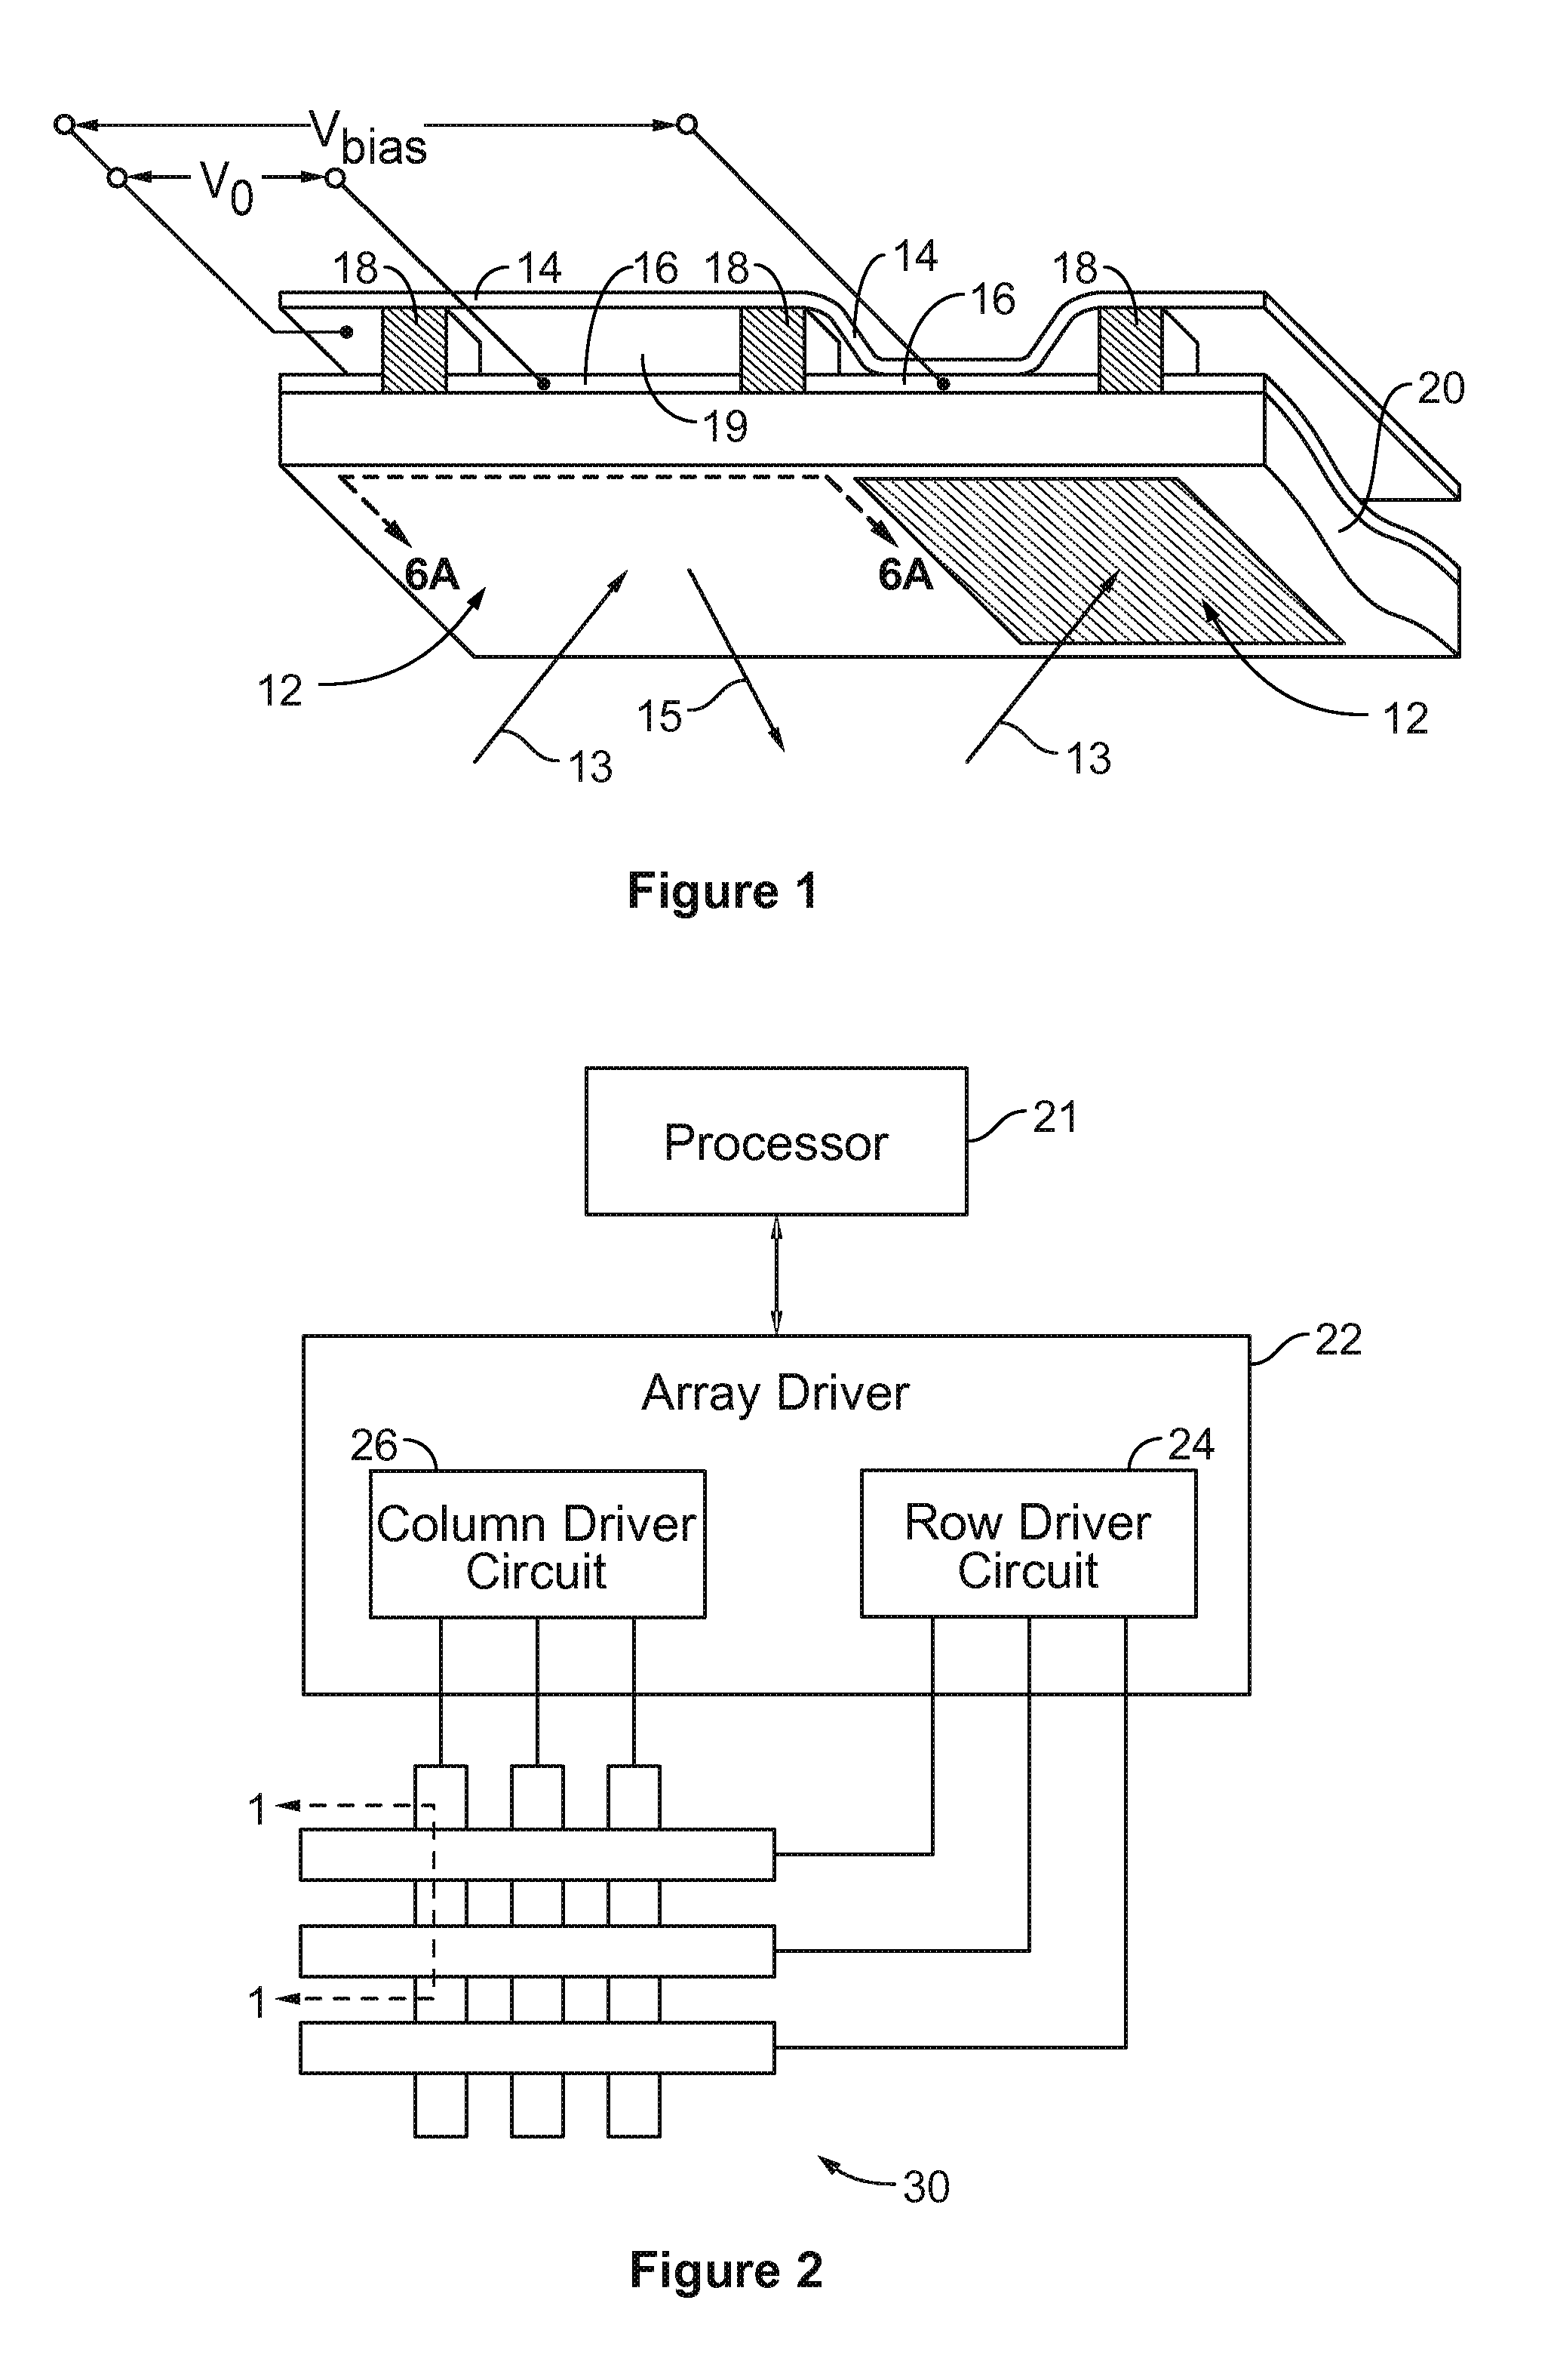 Multifunctional input device for authentication and security applications